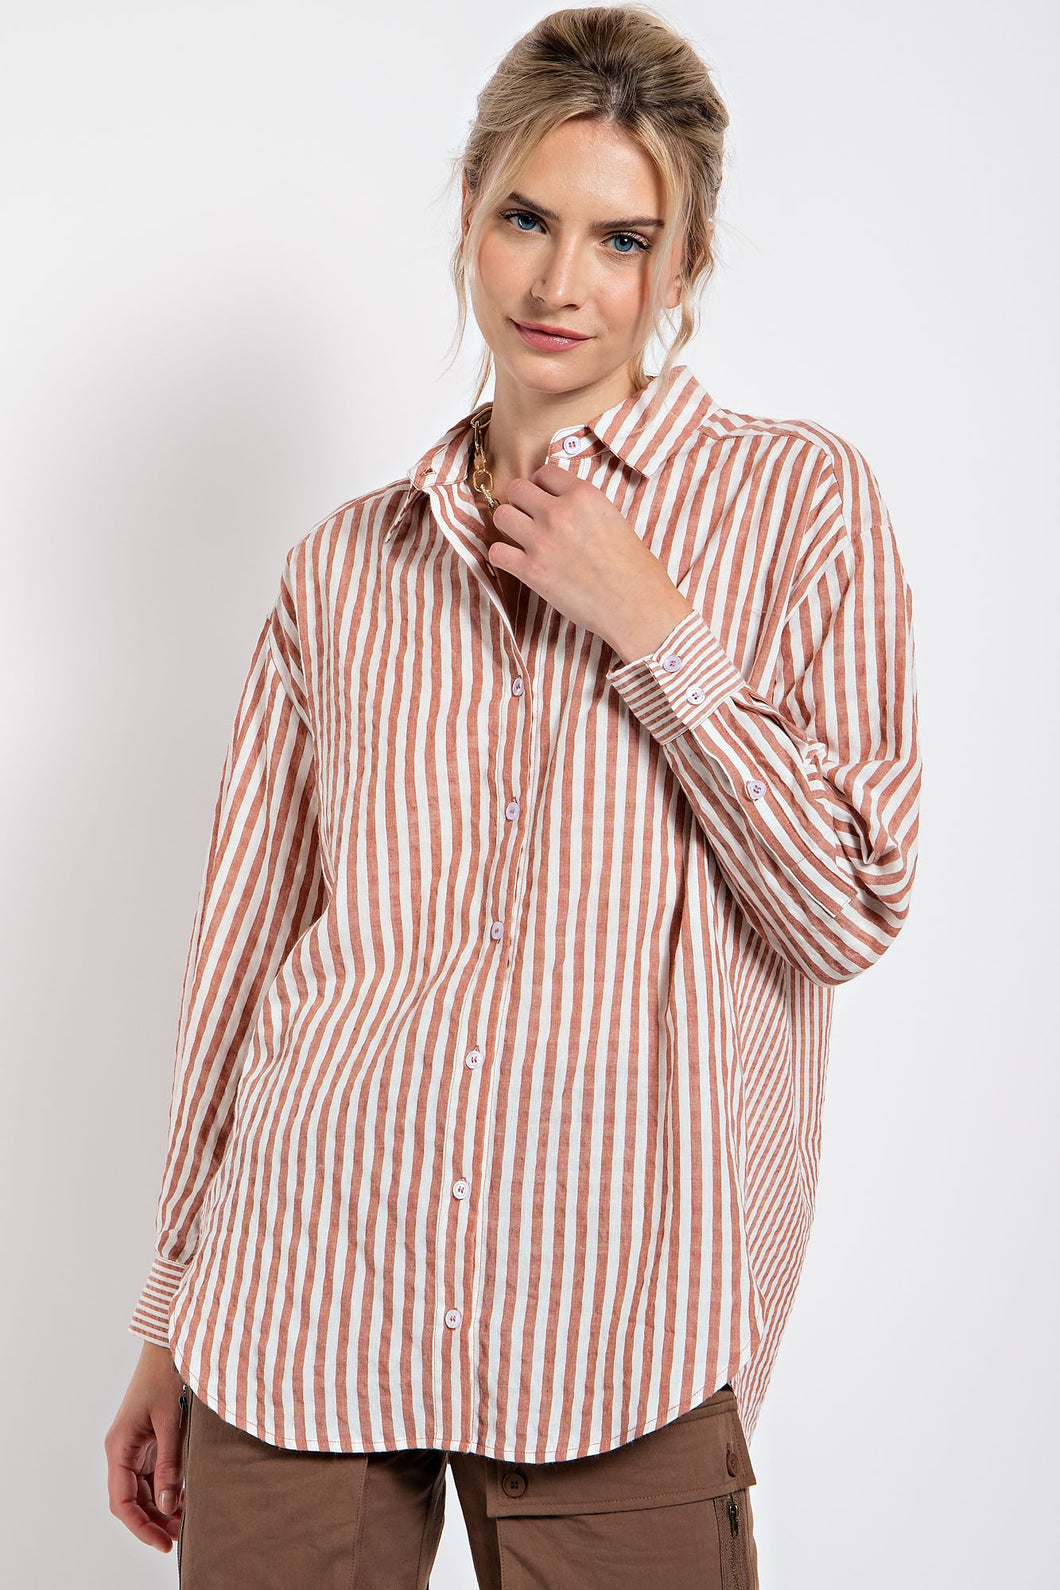 Easel Mixed Stripes Button Down Oversized Shirt in Crimson Shirts & Tops Easel   